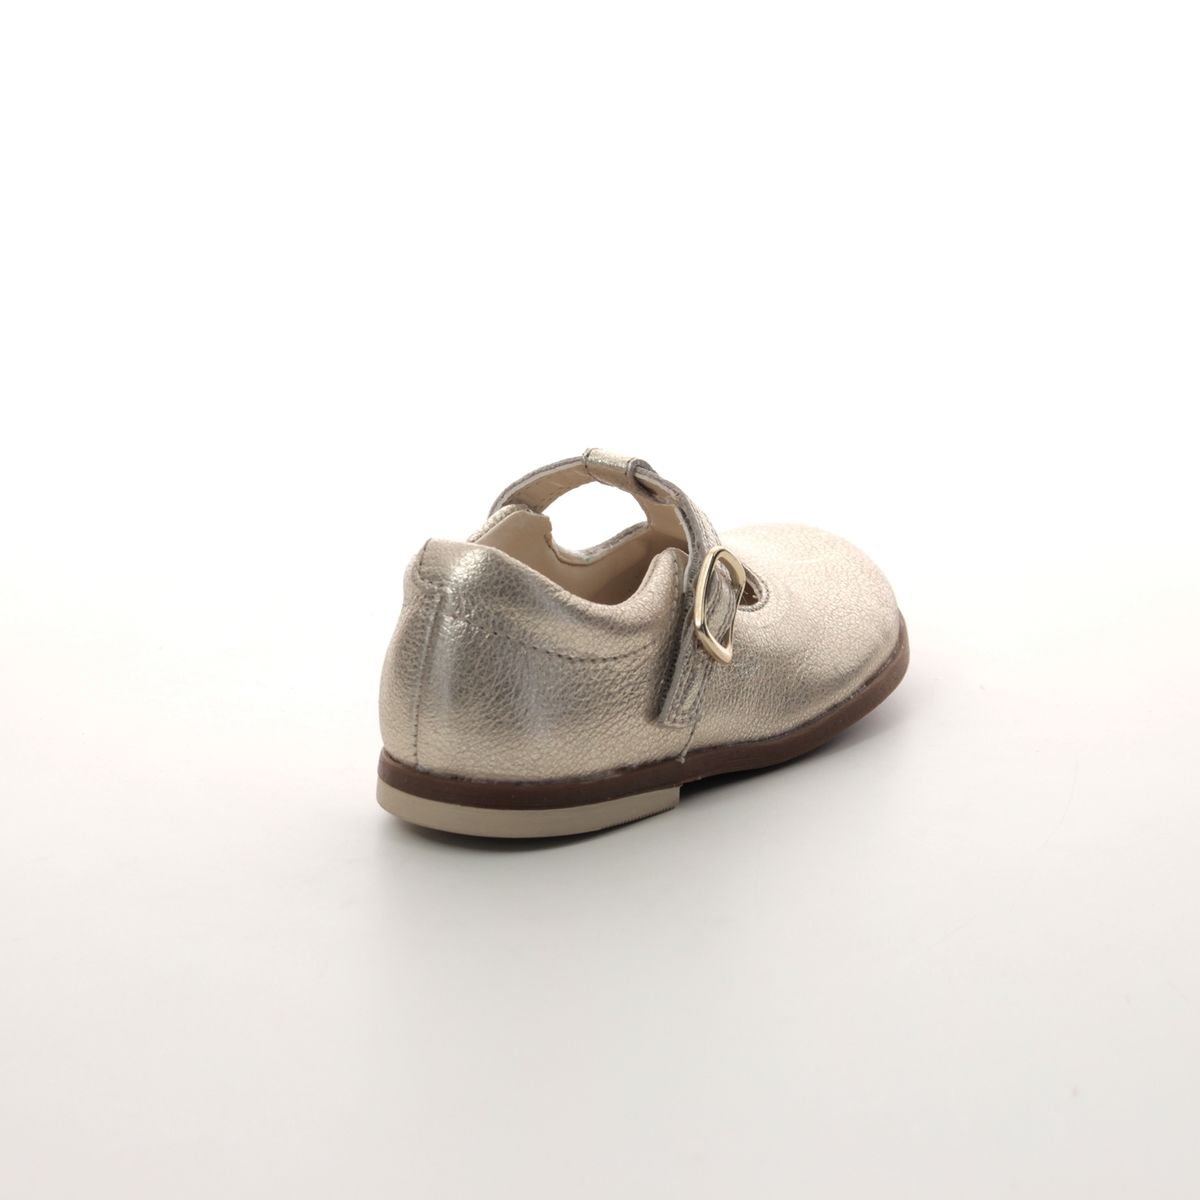 Clarks Drew Shine T F Fit Gold first shoes